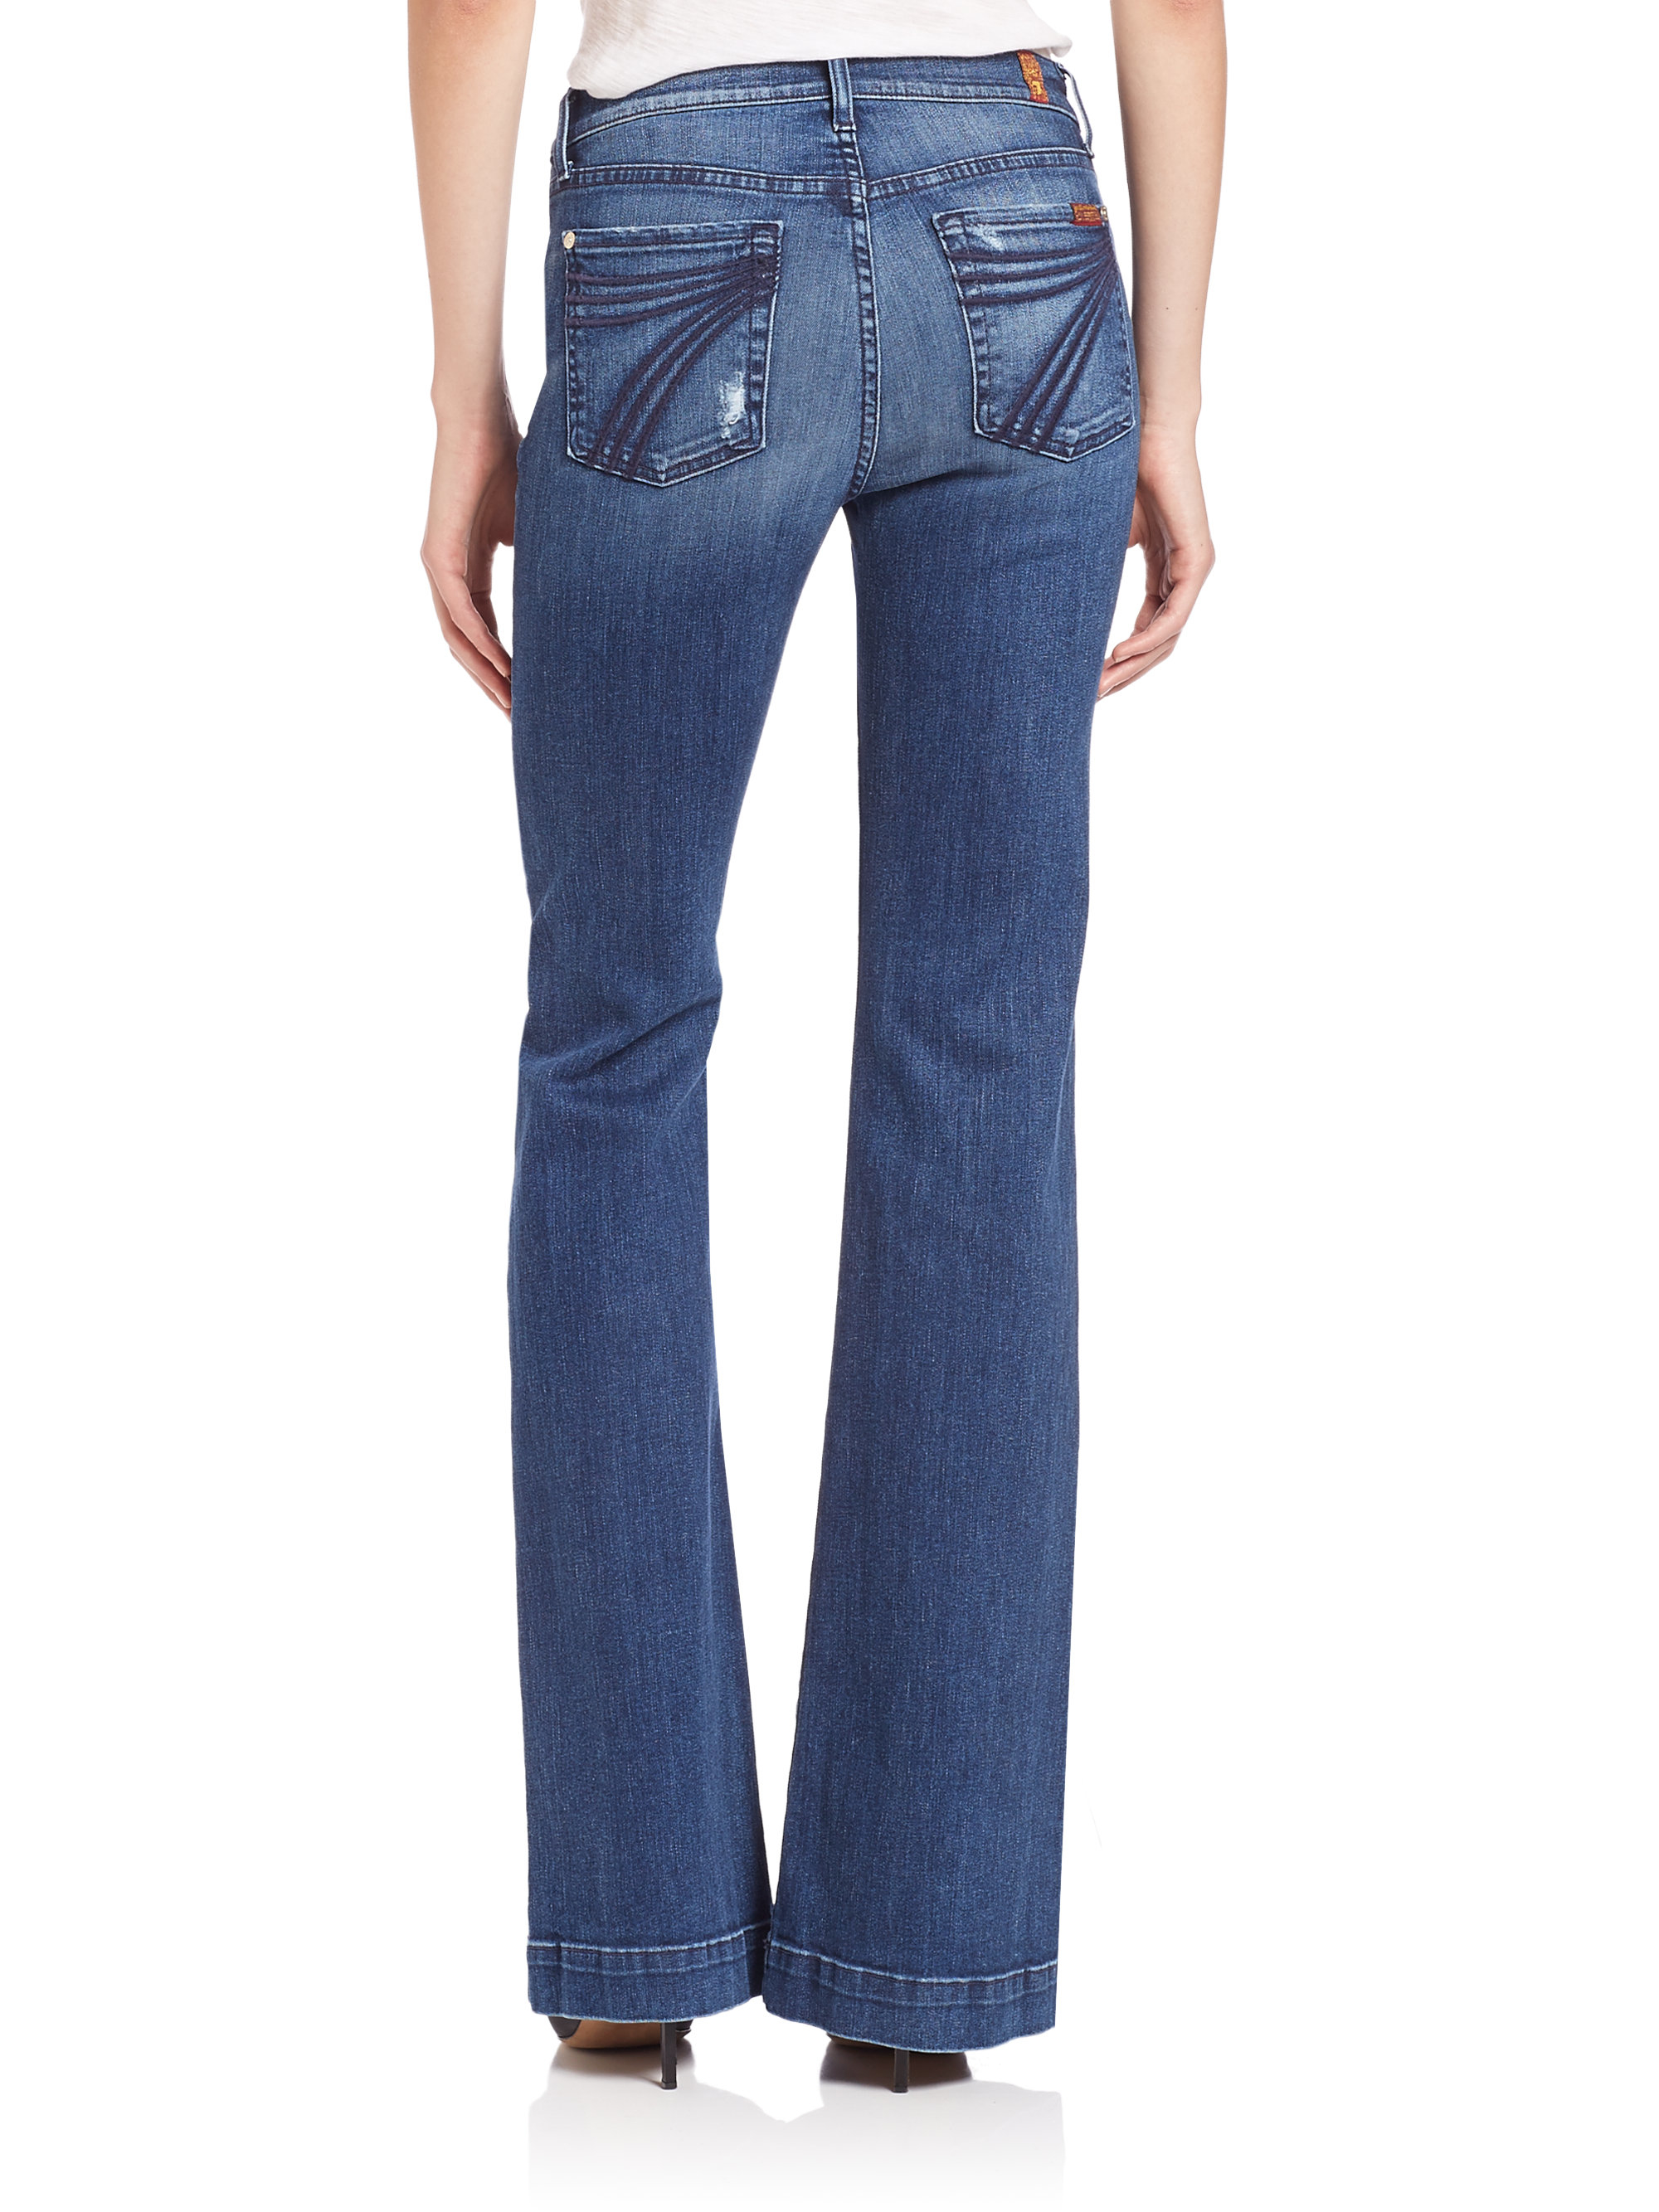 Lyst - 7 for all mankind Dojo Distressed Flared Jeans in Blue